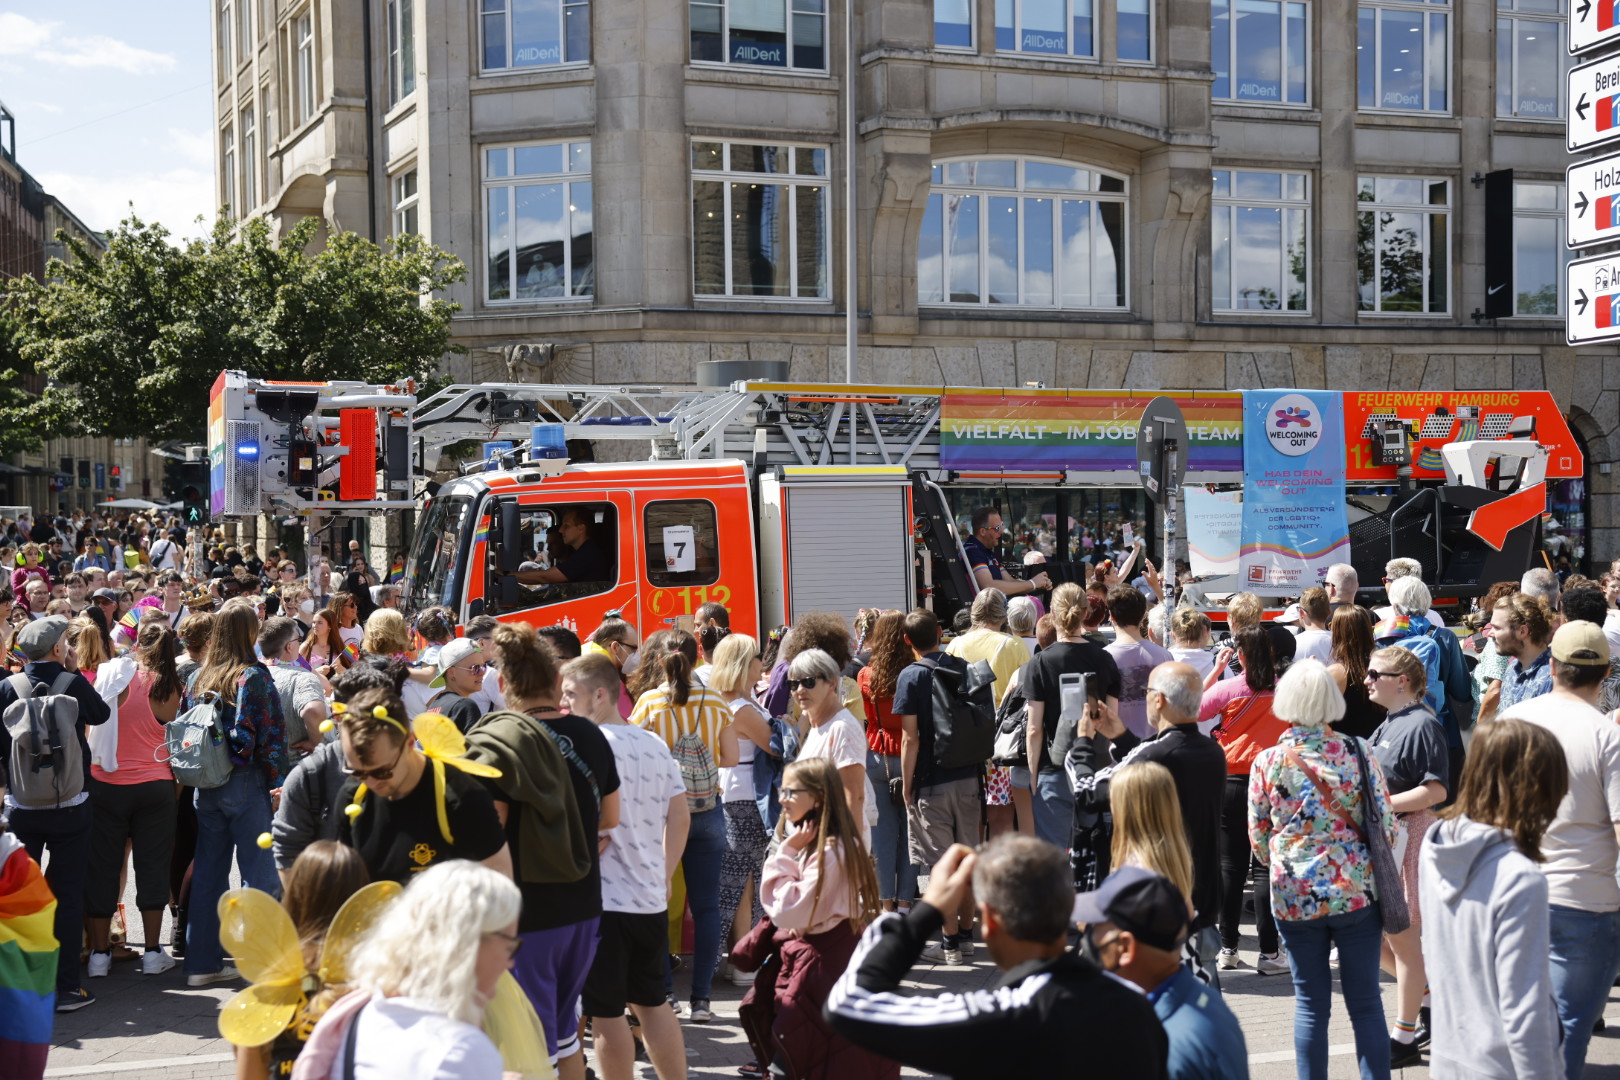 A fire truck carrying rainbow flags drives through a crowd